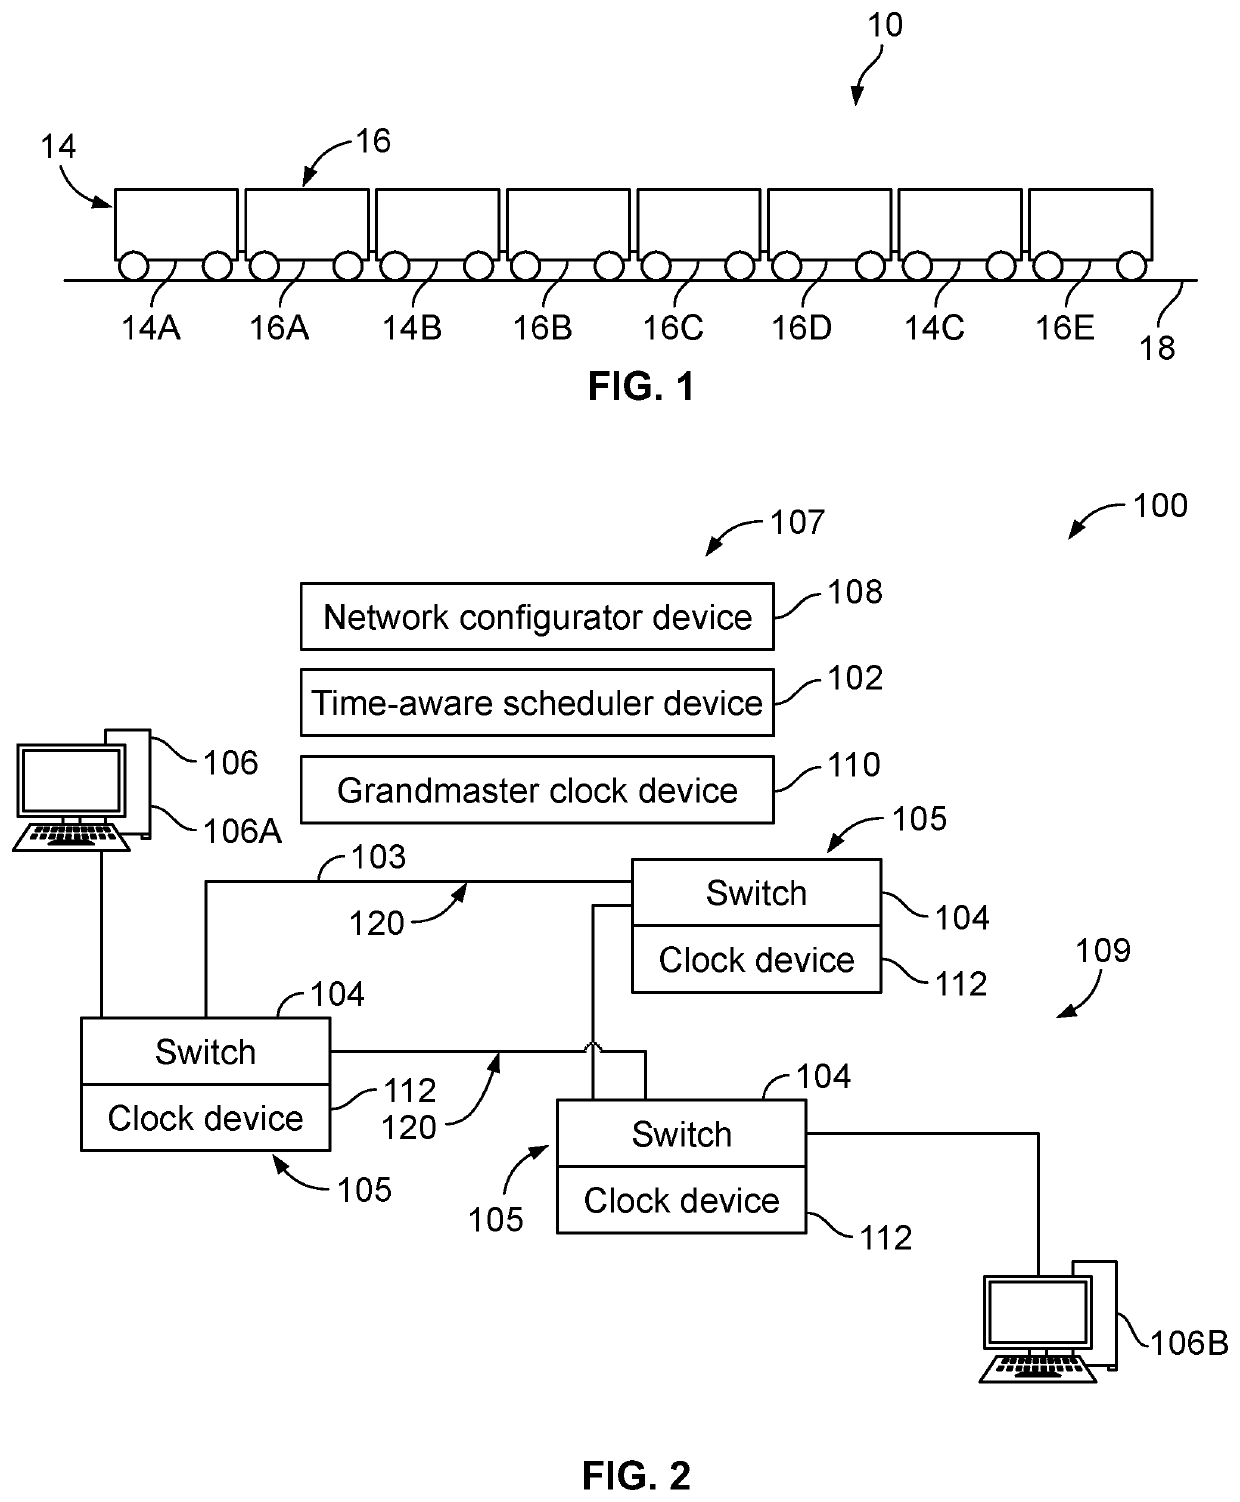 System and method for establishing reliable time-sensitive networks